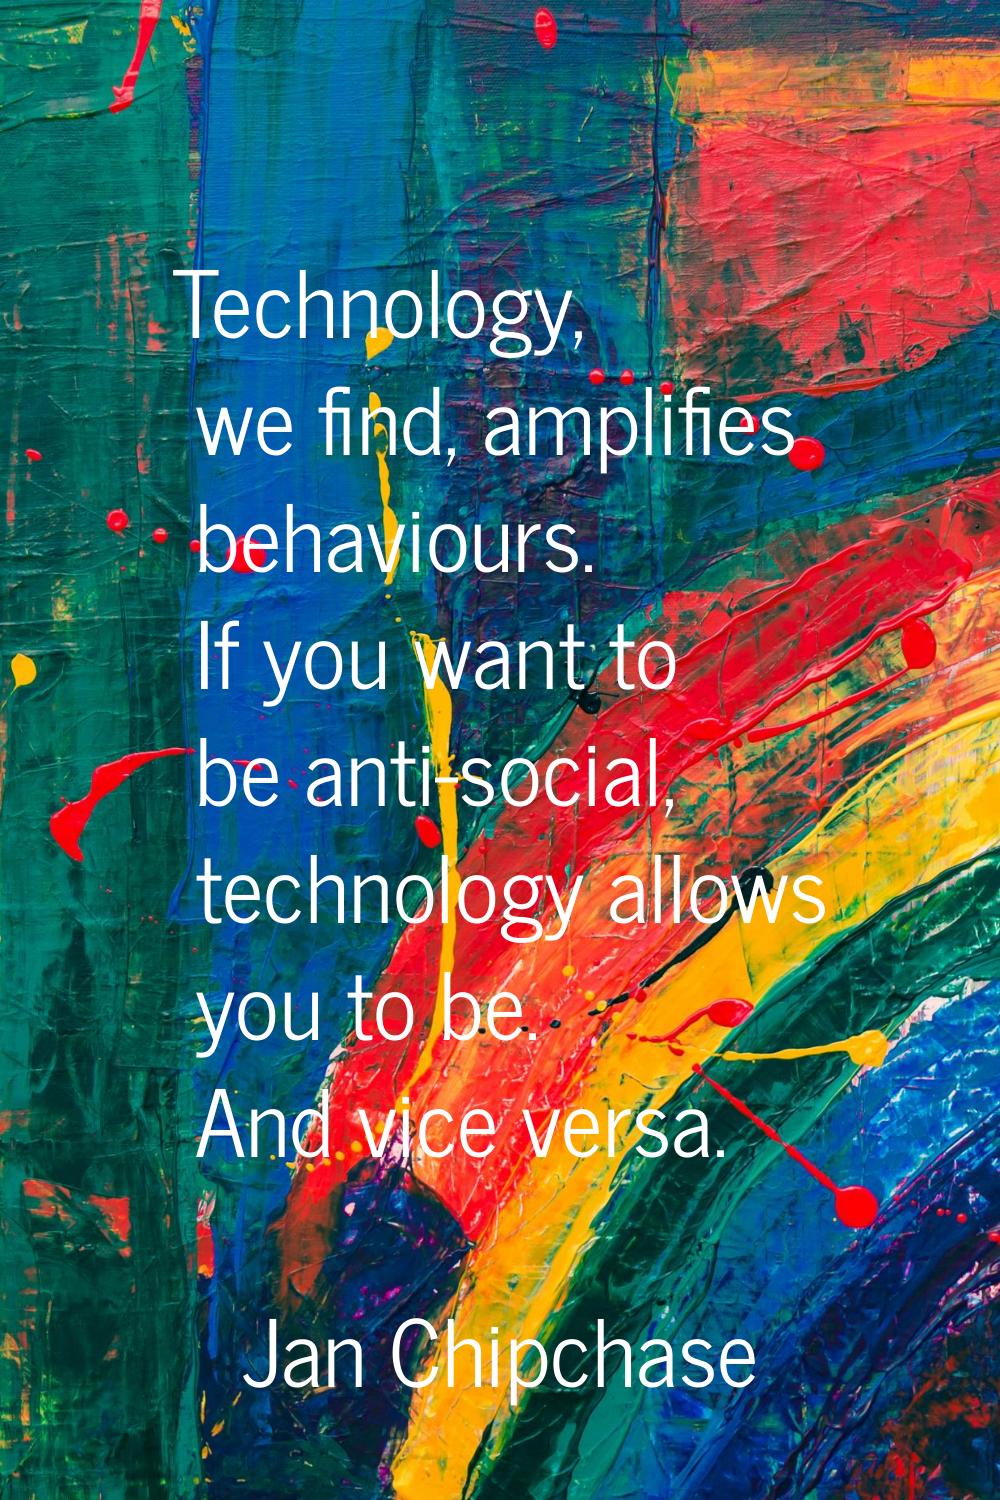 Technology, we find, amplifies behaviours. If you want to be anti-social, technology allows you to 